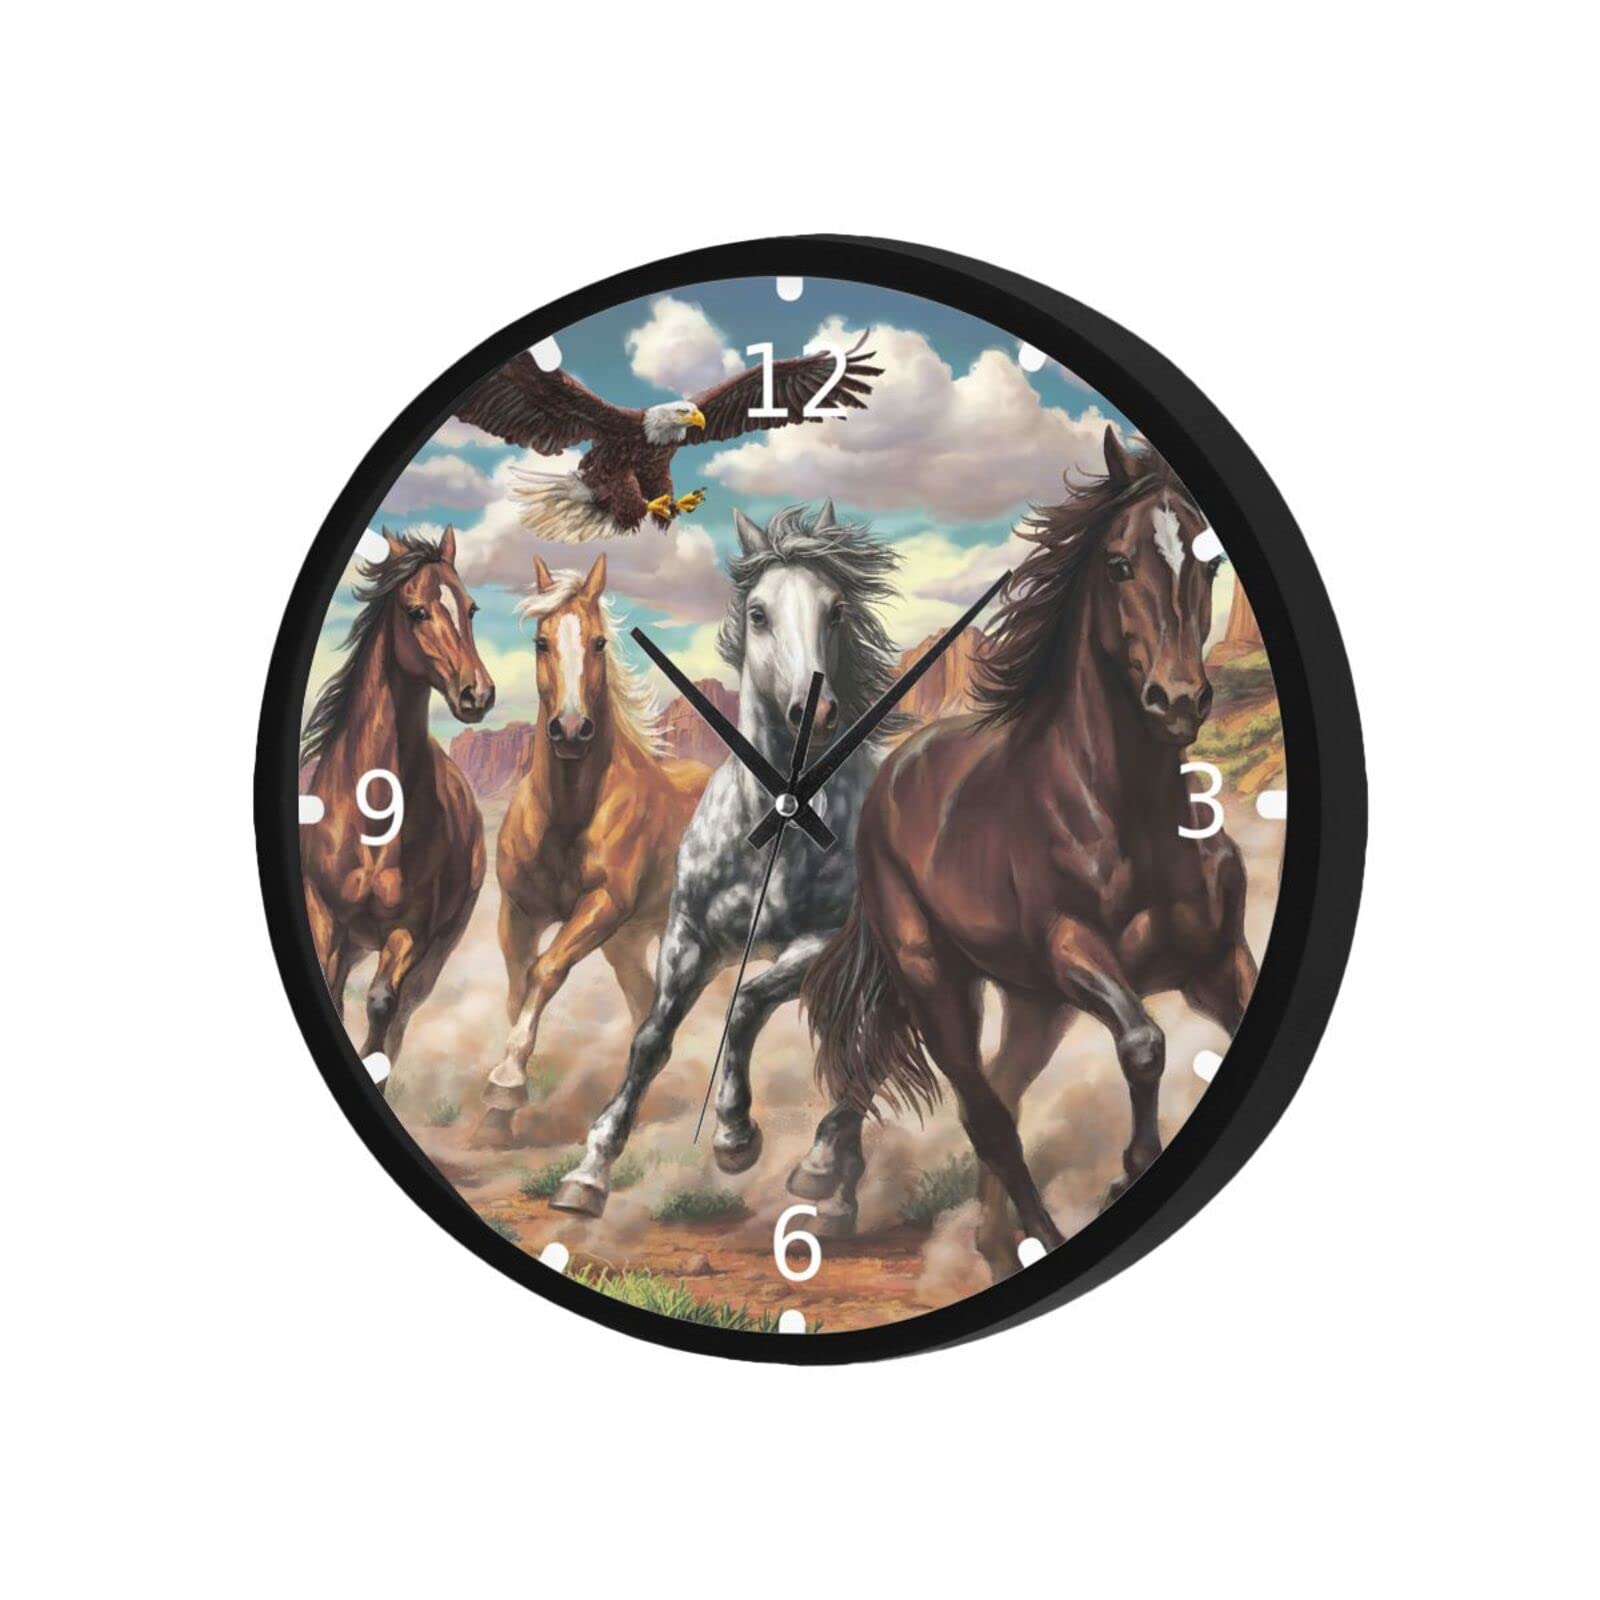 Horse and Eagle Pattern Wall Clock Silent Non-Ticking Battery Operated Round Wall Clock Modern Art Style for Office School Living Room Home Kitchen...